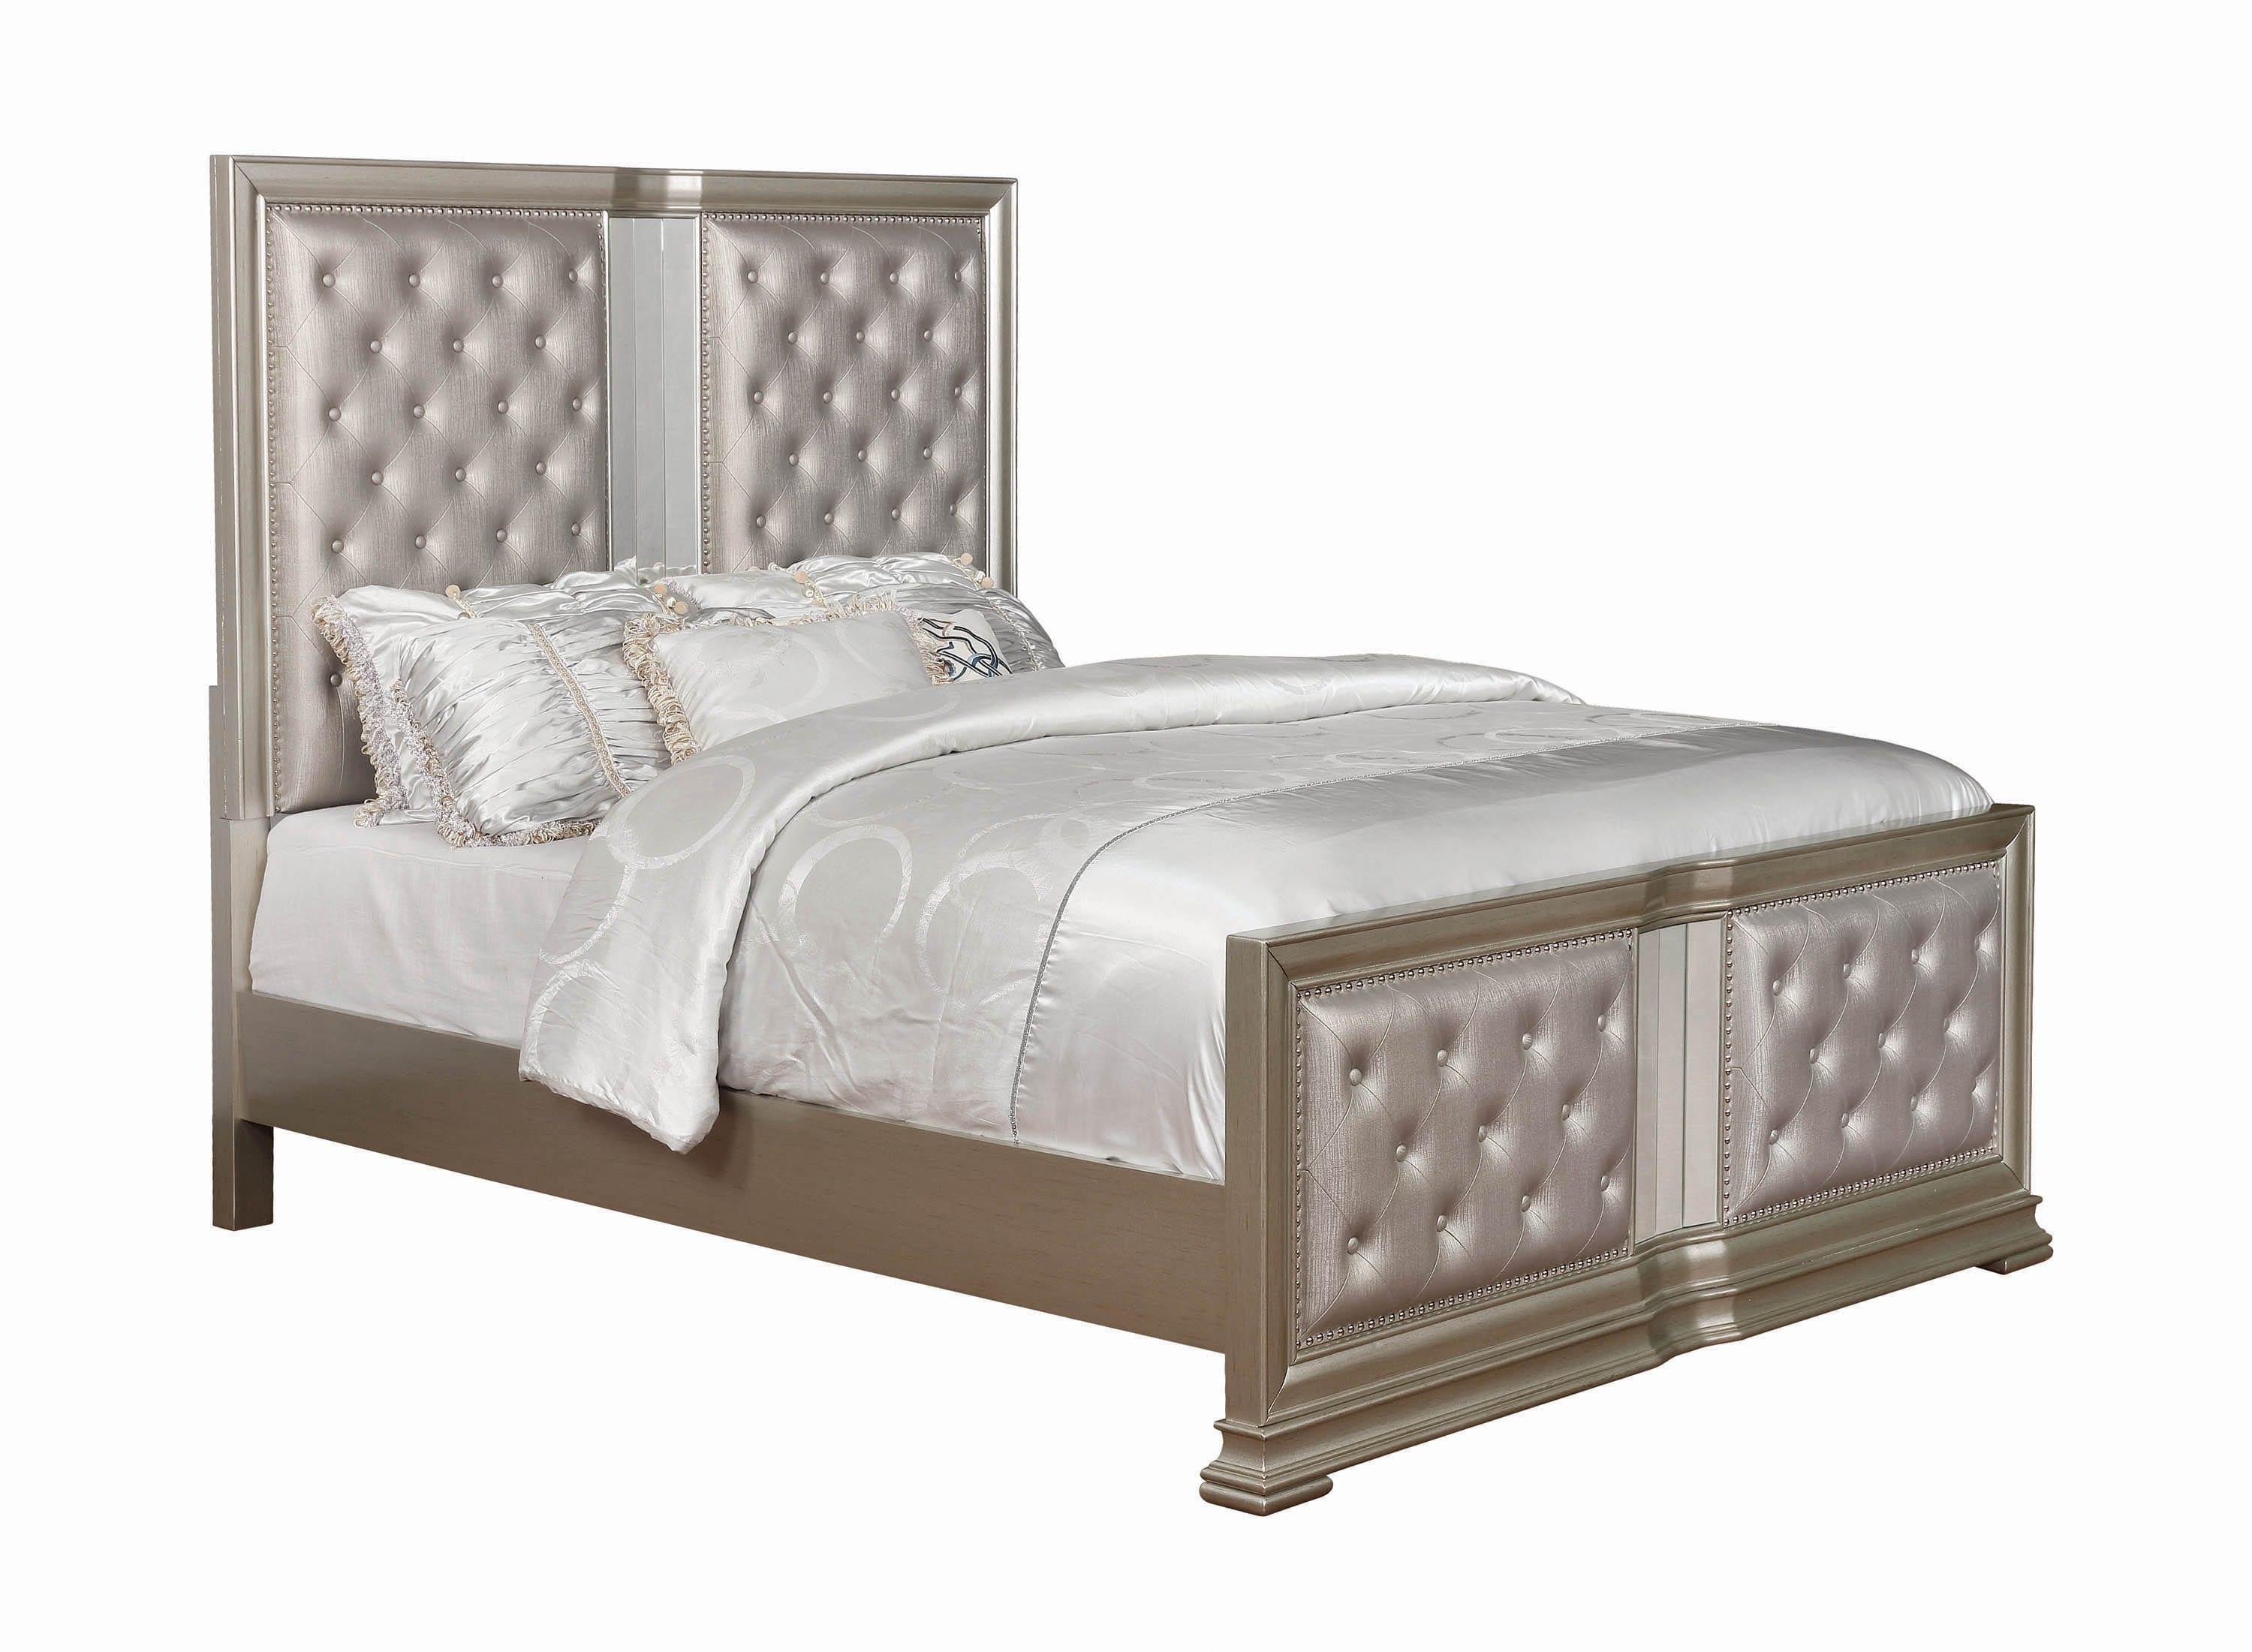 

    
Transitional Beige Fabric Upholstery E king bed Adele by Coaster
